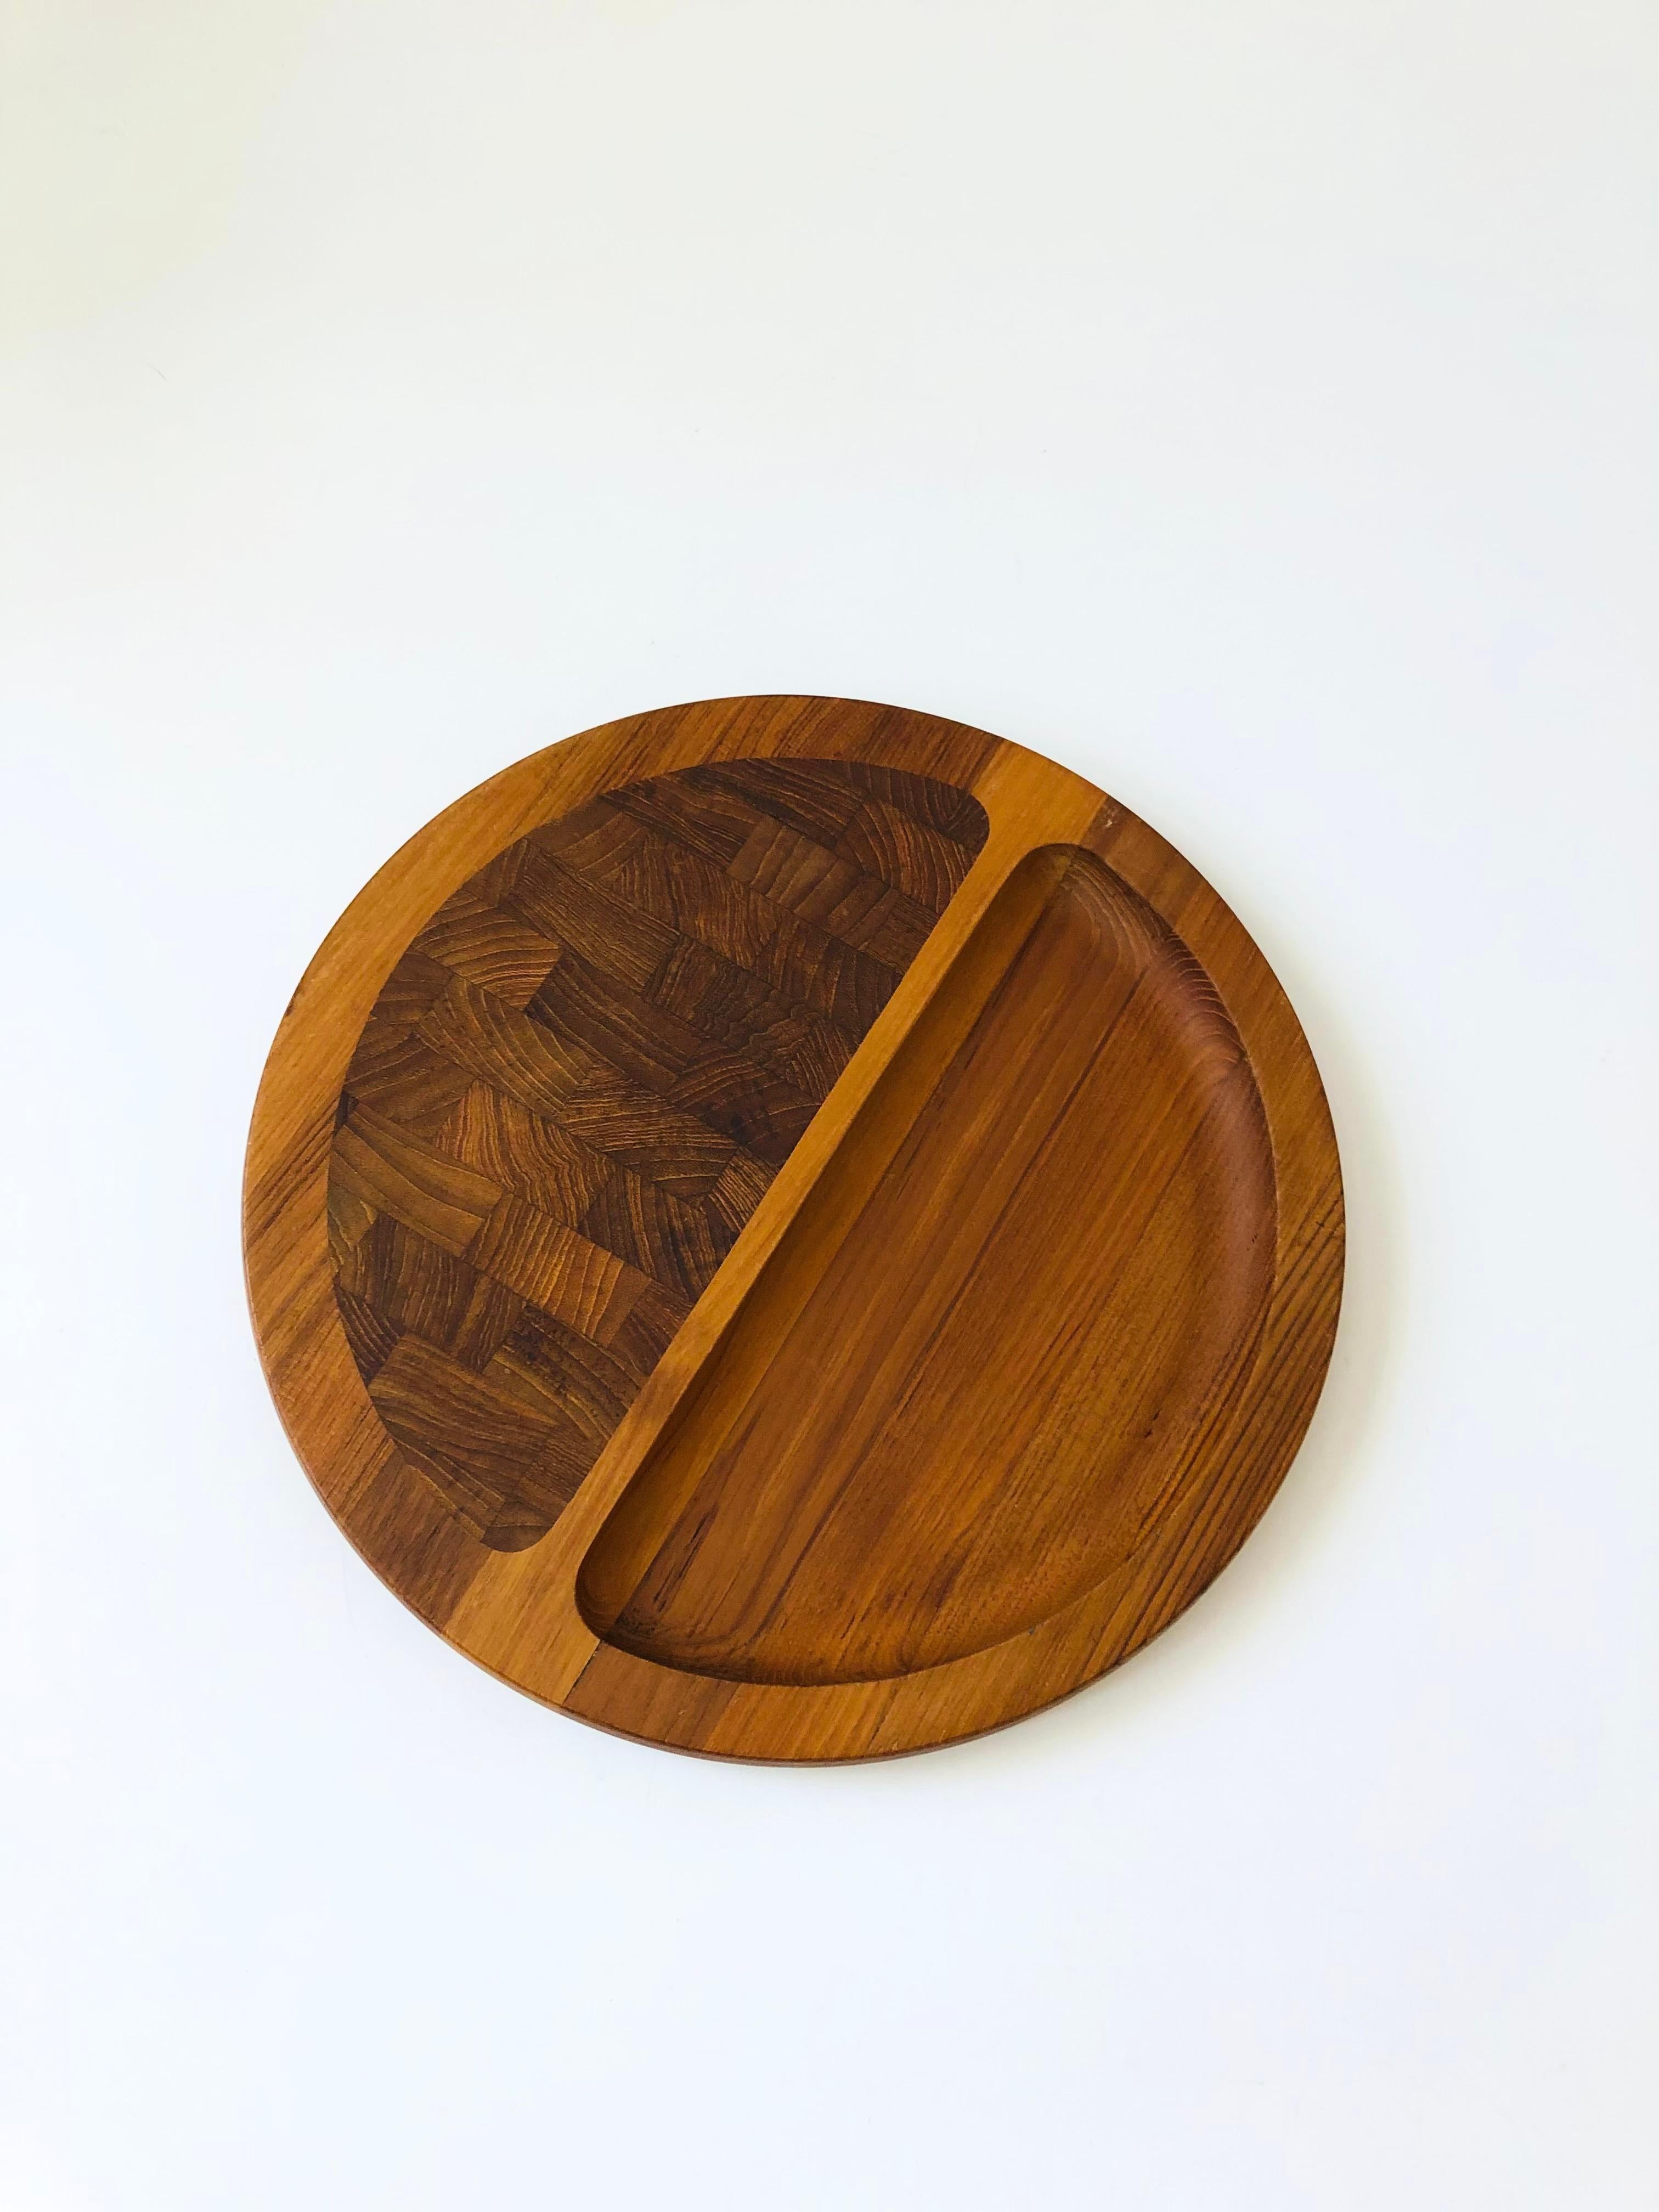 A mid century Danish teak cutting board and serving tray designed by Jens Quistgaard for Dansk. Circular shape with one flattered side and a recessed semi circle for serving. Marked on the base 